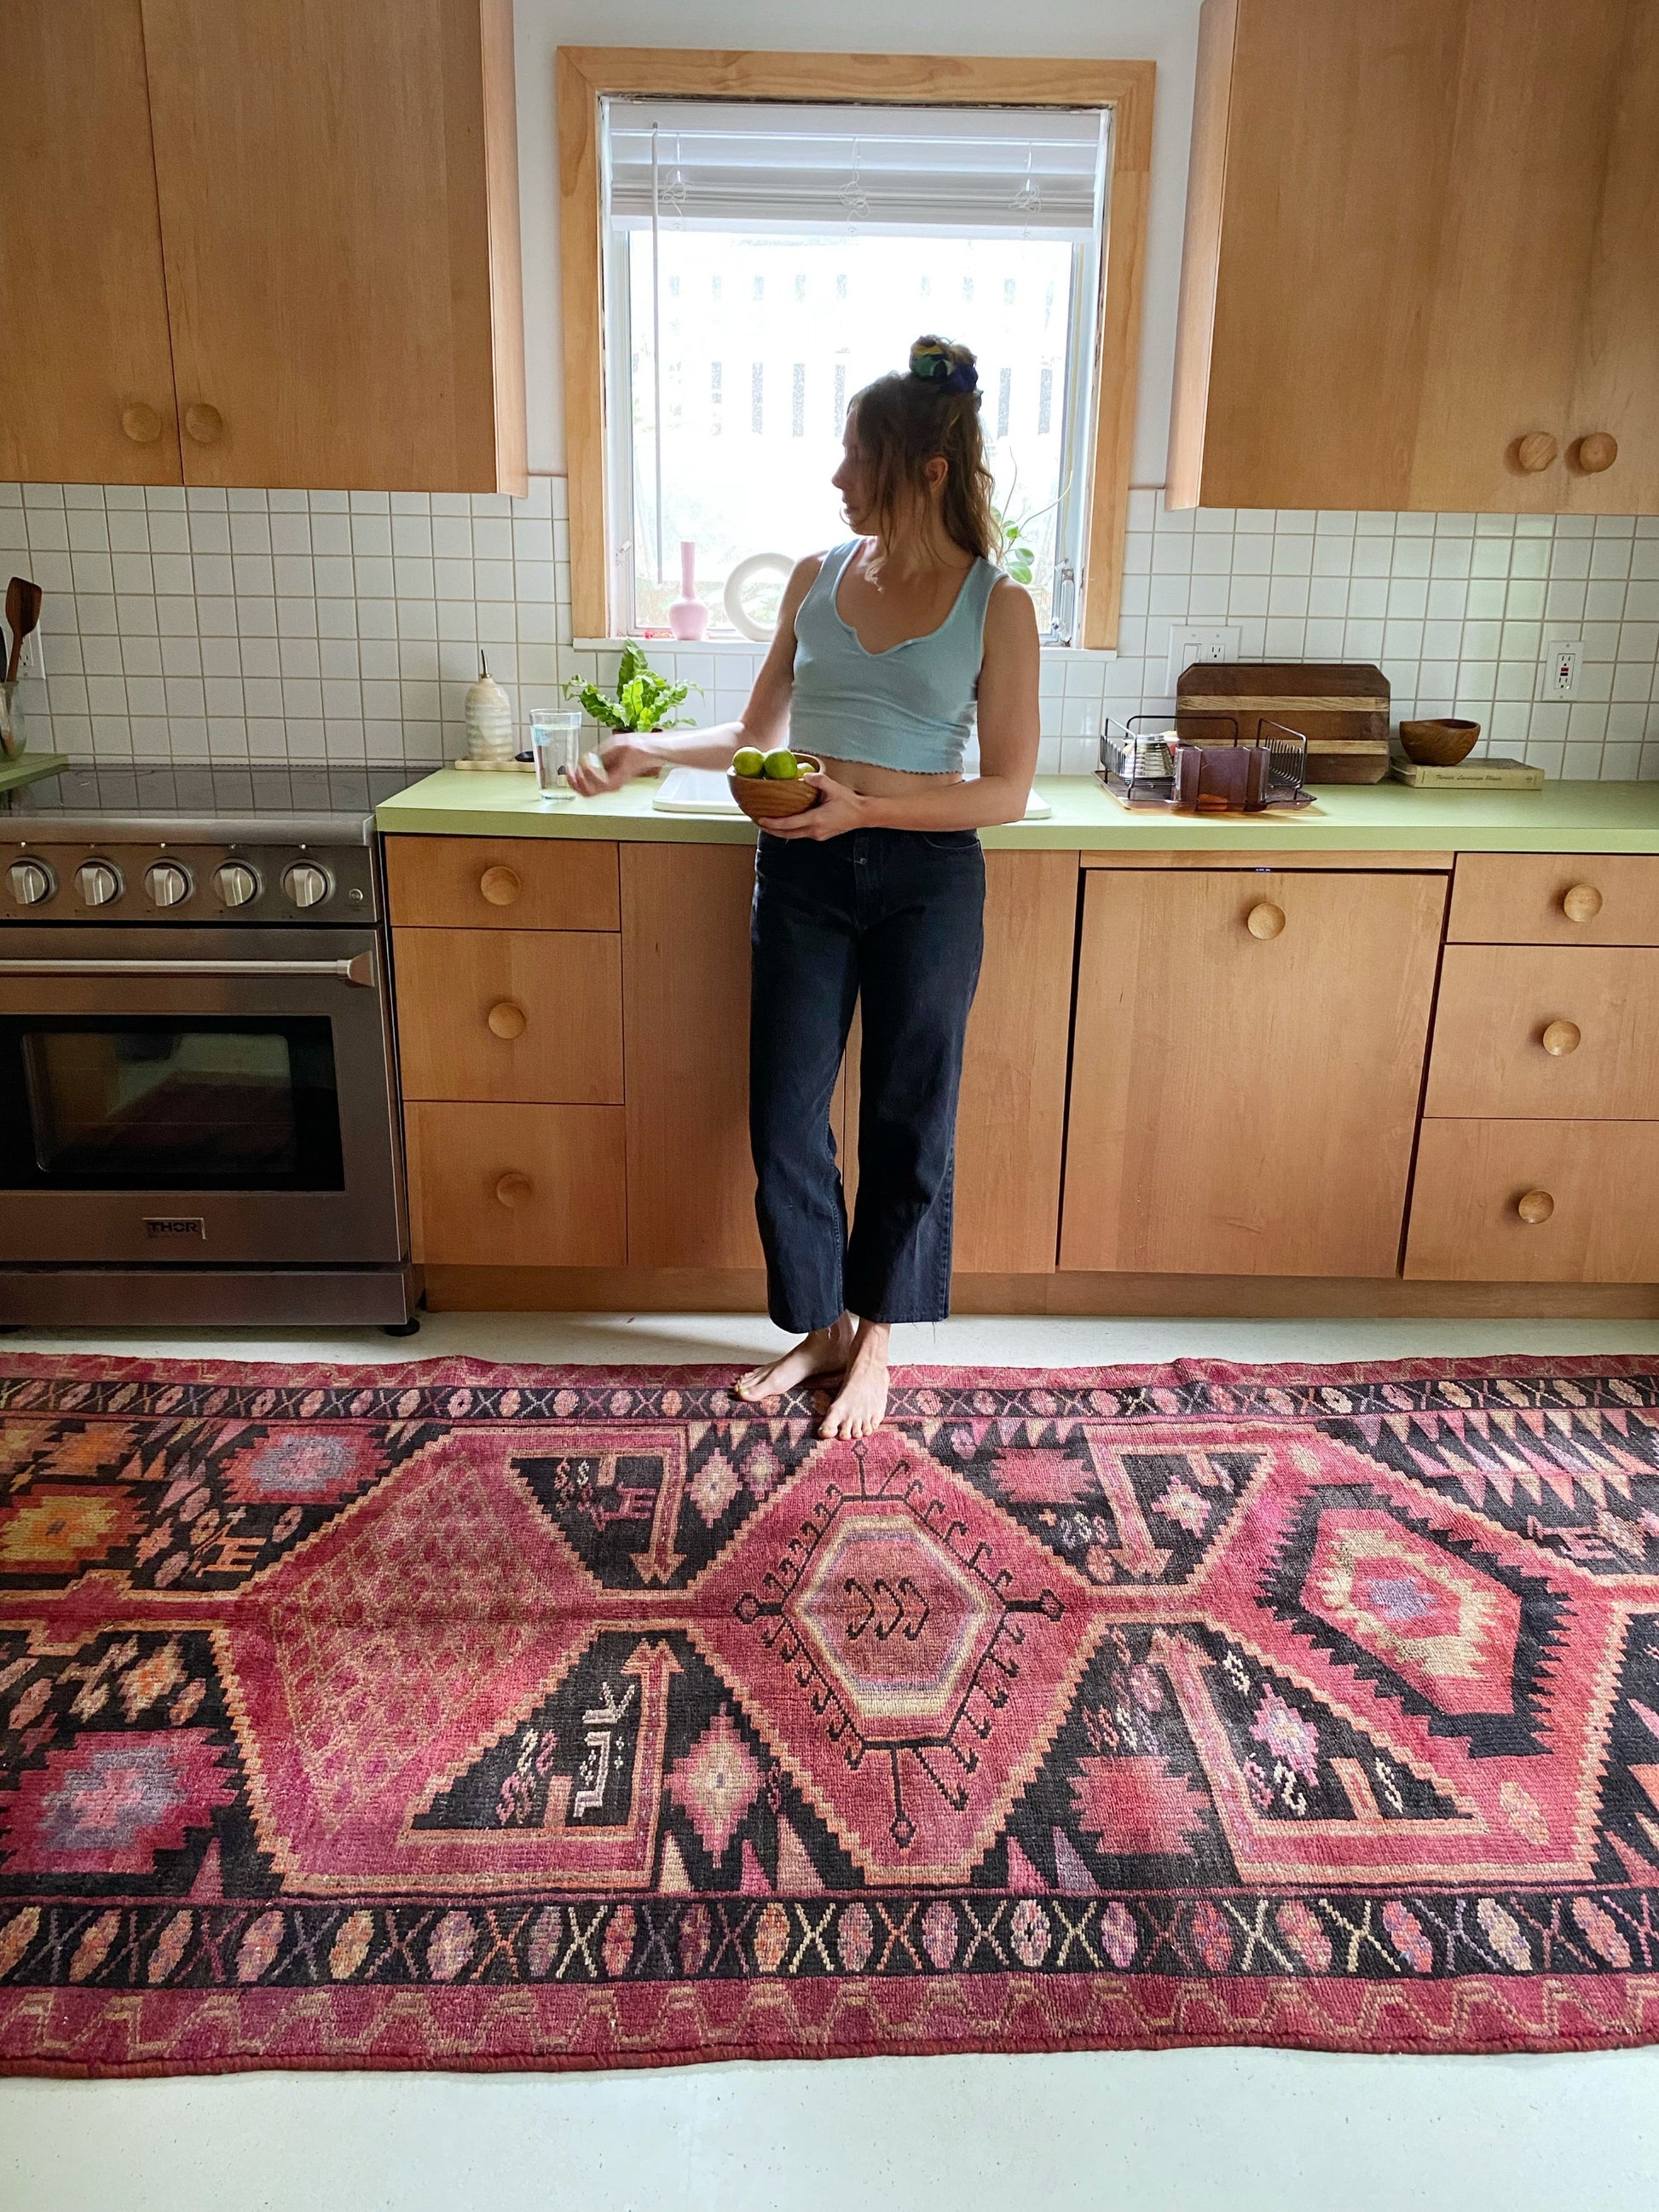 A beautiful Persian rug enhances the kitchen and introduces vibrant splashes of color